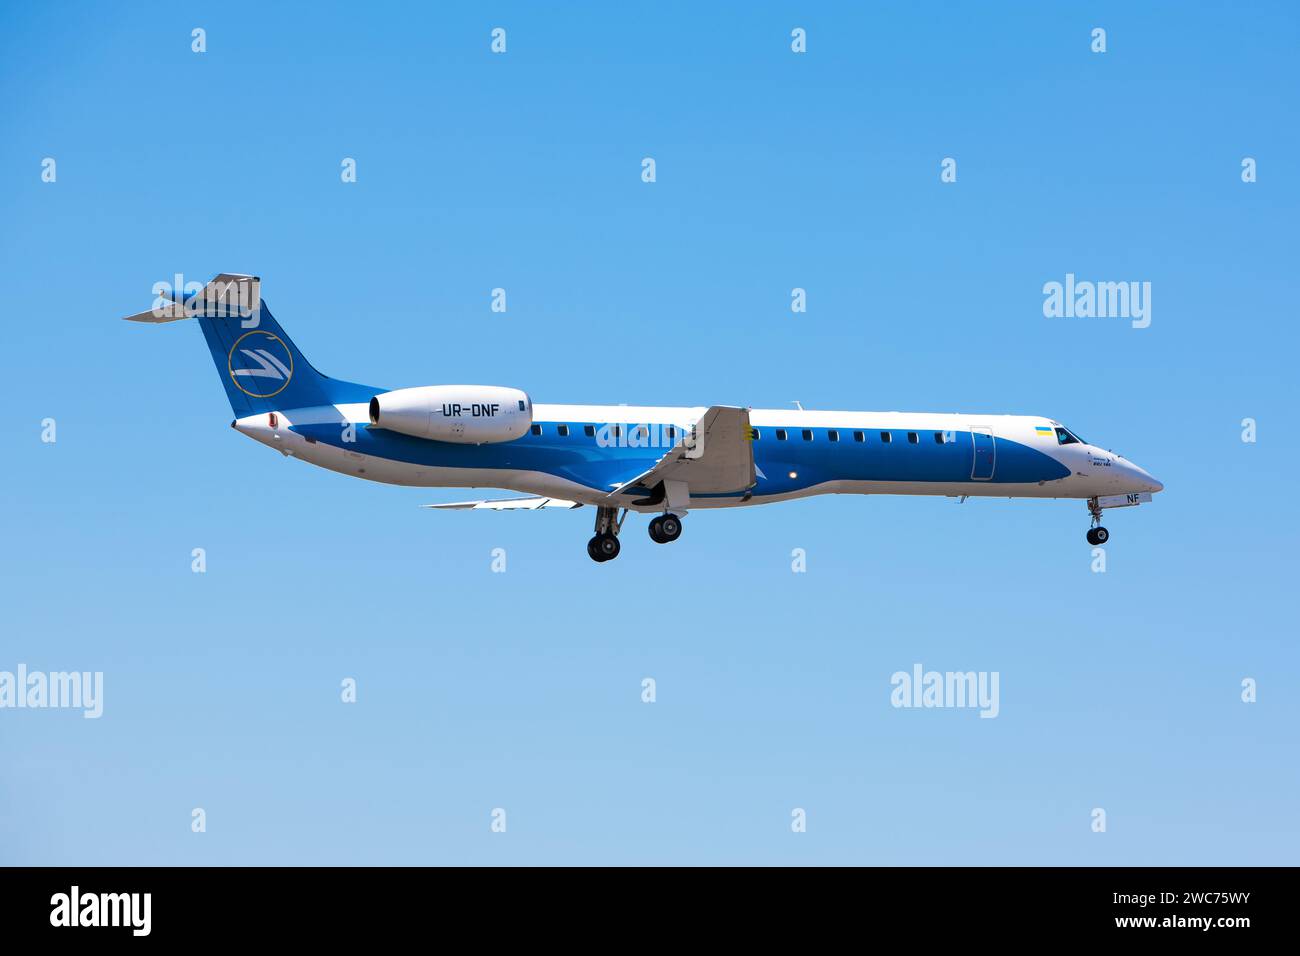 Boryspil, Ukraine - August 27, 2019: Airplane Embraer ERJ-145 (UR-DNF) of Windrose Airlines is landing in Boryspil International Airport Stock Photo